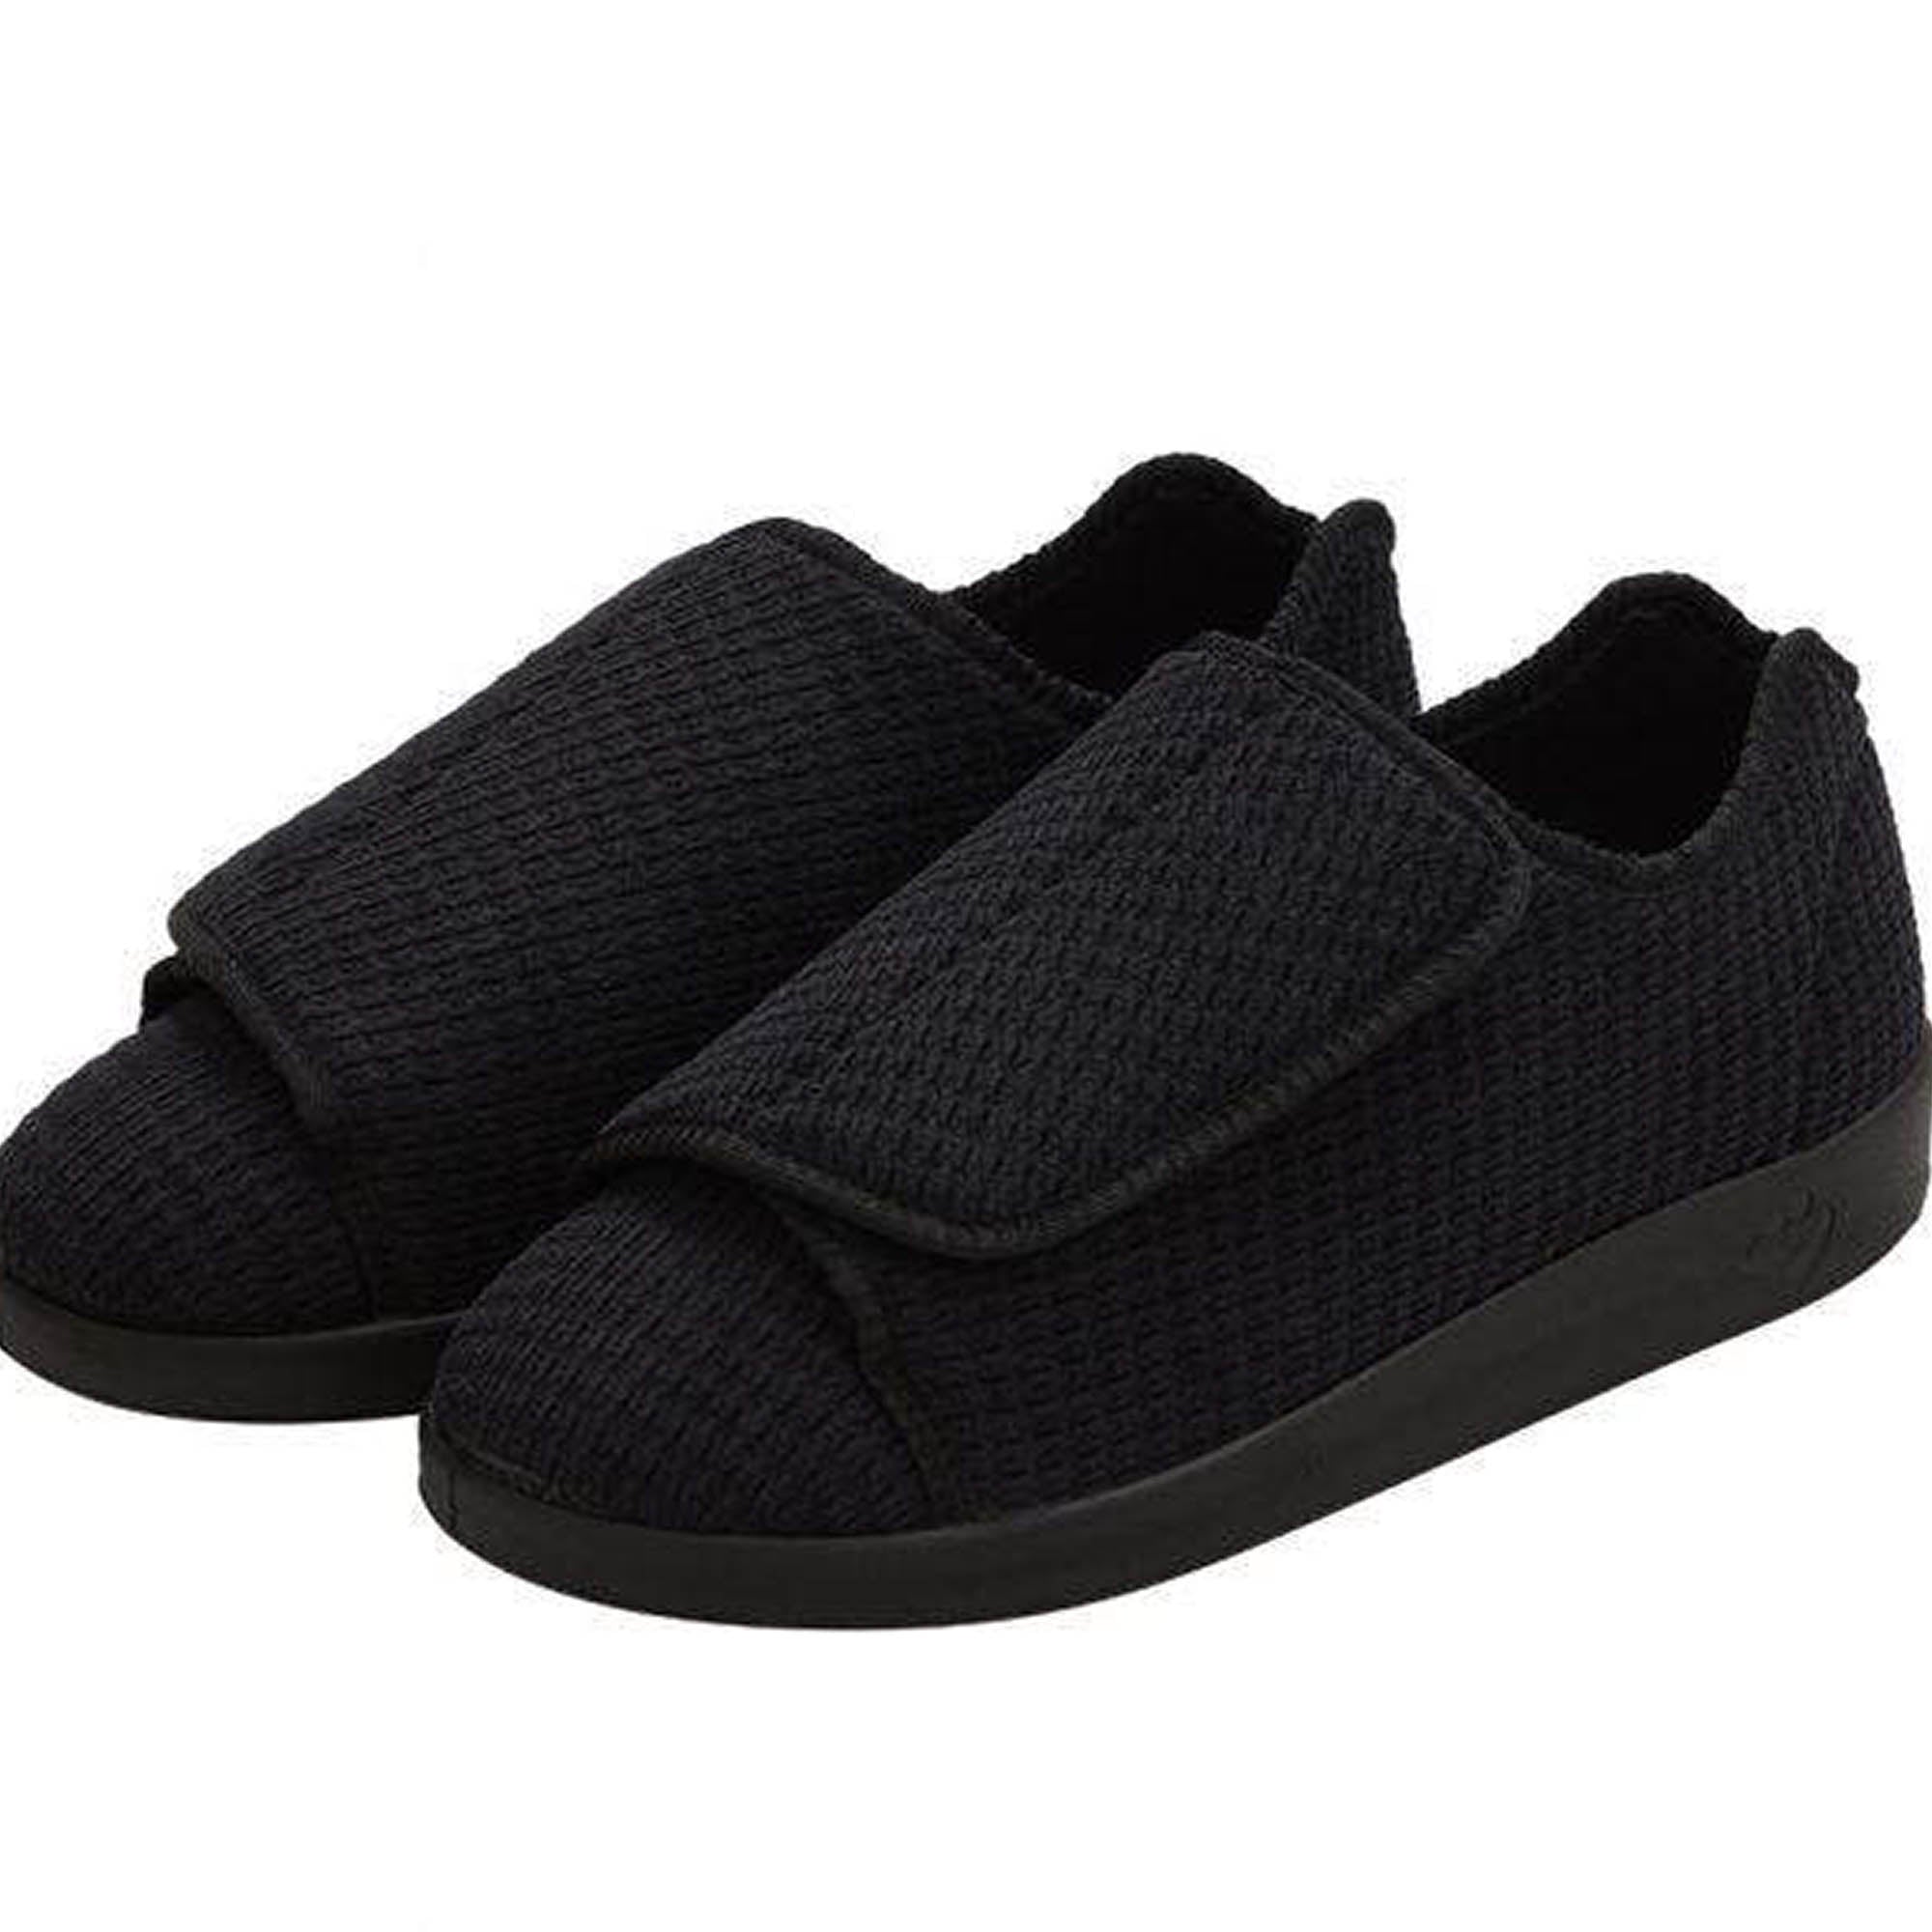 Silverts Men's Extra Extra Wide Slip-Resistant Slippers - Black - 13